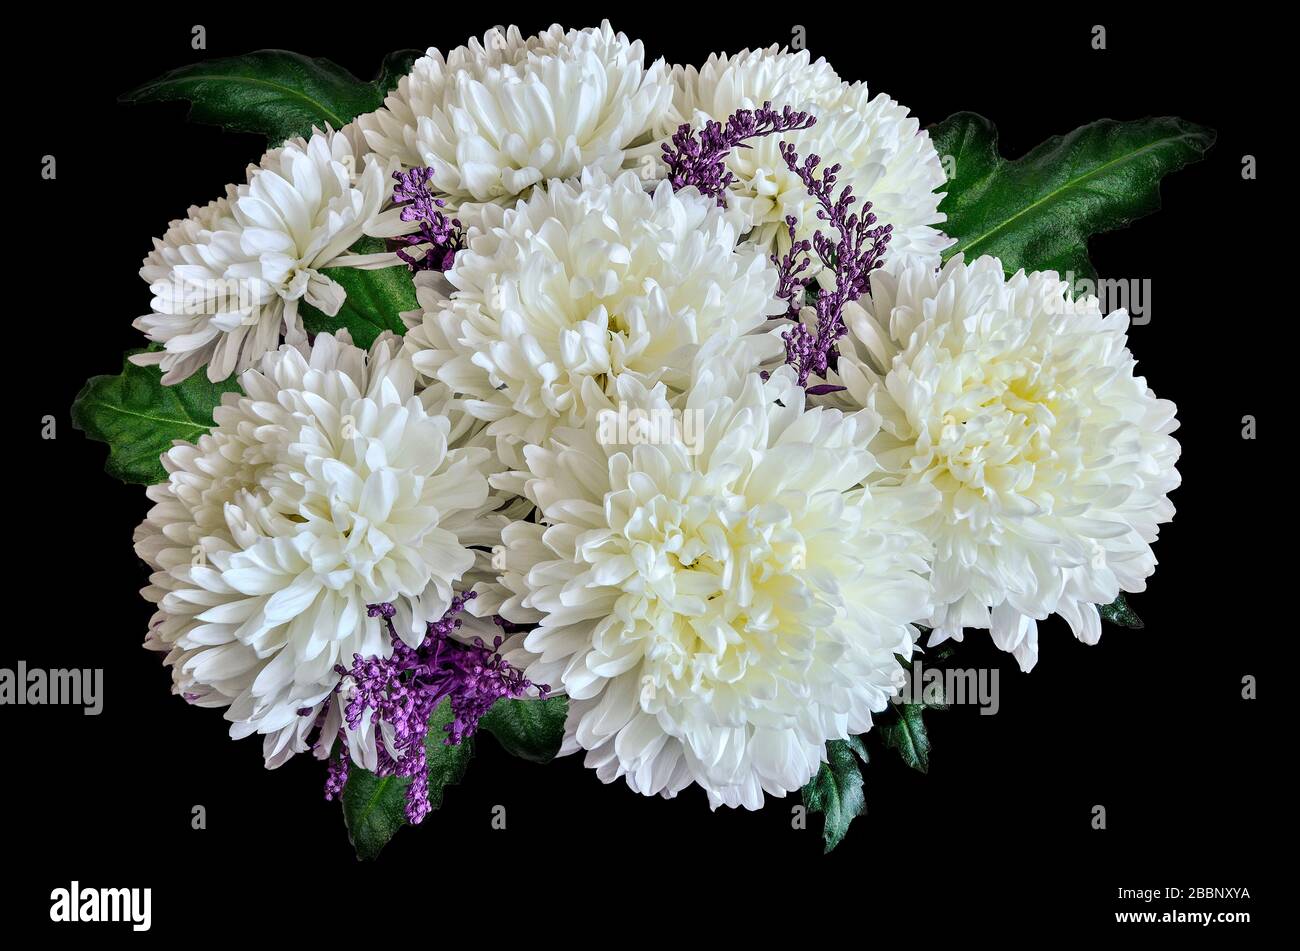 Vintage floral design - white chrysanthemum flowers bouquet with green leaves close up, on black background. Greeting card to any joyful or festive ev Stock Photo